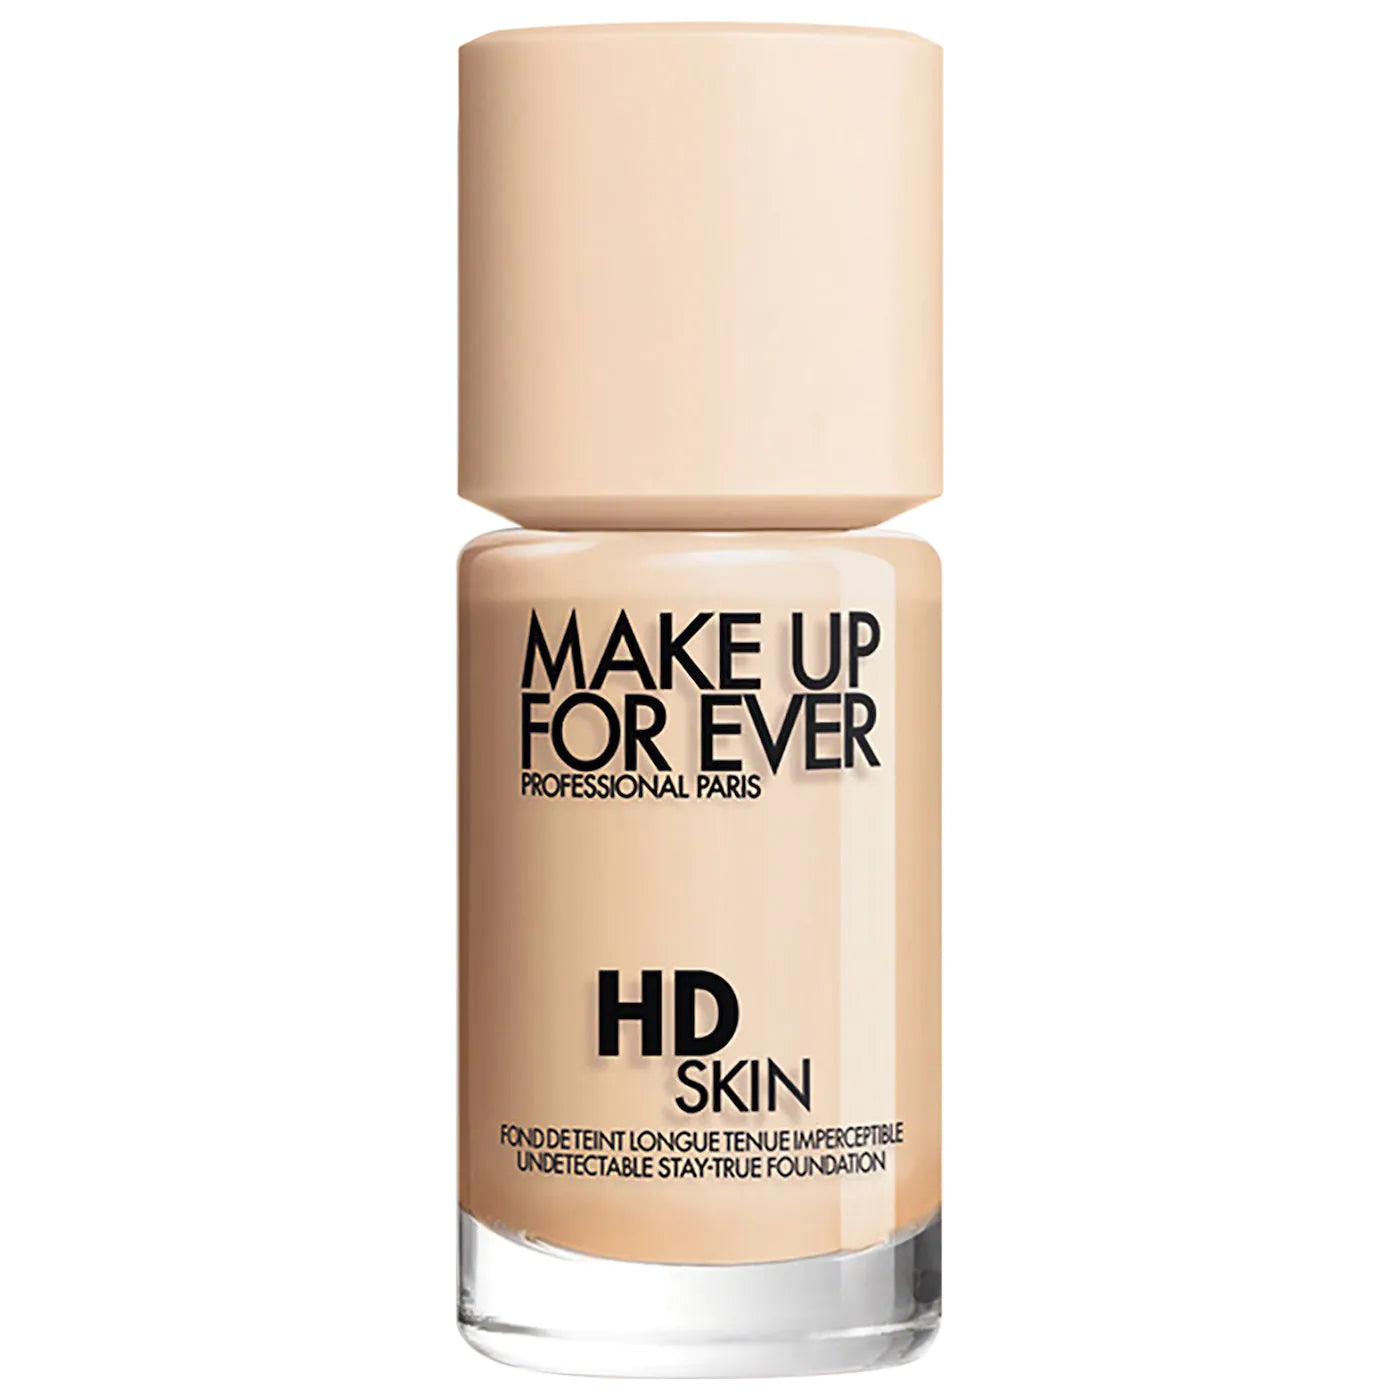 MAKE UP FOR EVER - HD Skin Undetectable Longwear Foundation | 30 mL